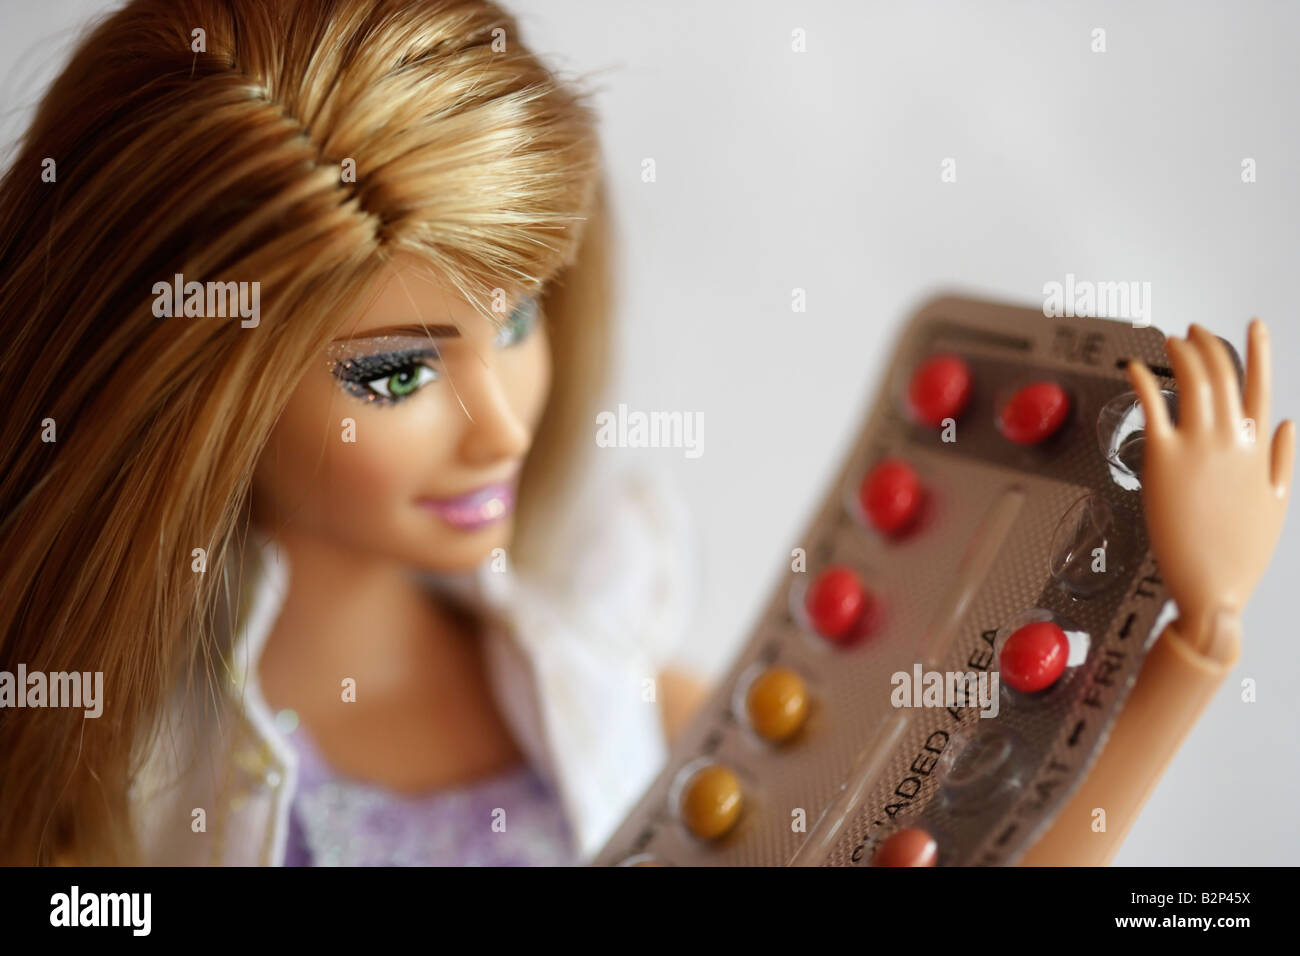 Barbie Doll Series. Barbie takes the contraceptive pill And misses a day  Stock Photo - Alamy